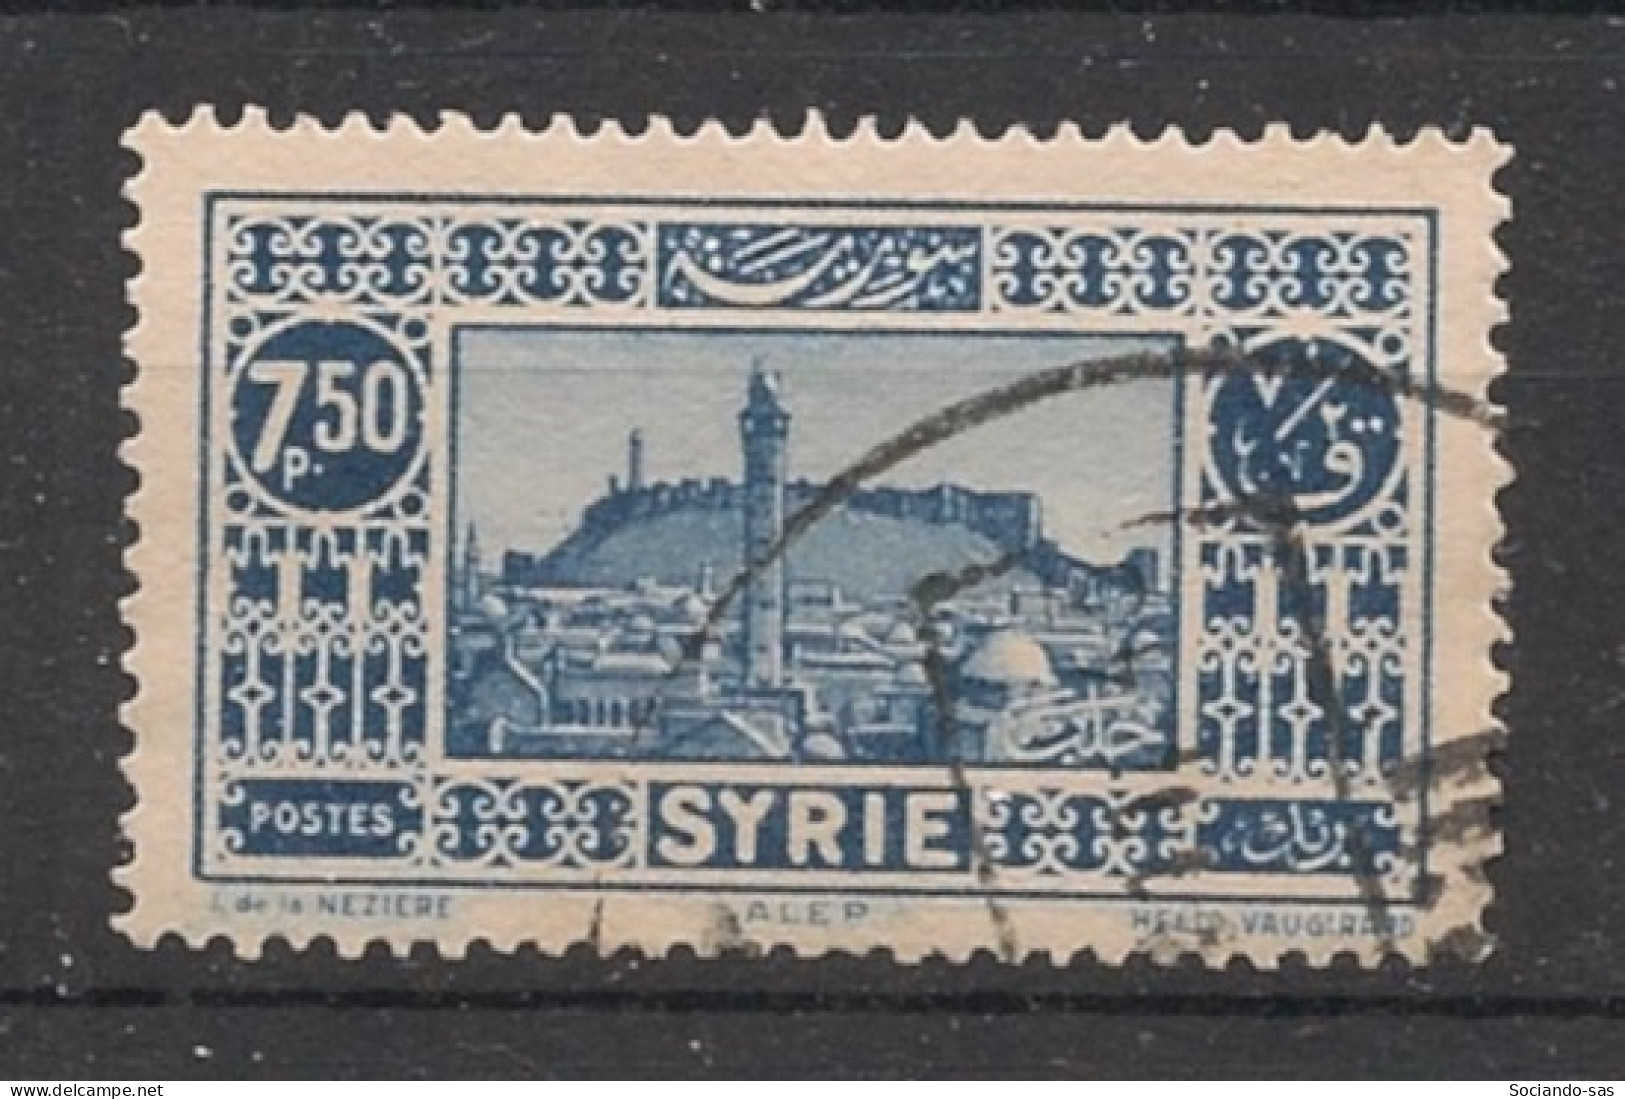 SYRIE - 1930-36 - N°YT. 211 - Alep 7pi50 - Oblitéré / Used - Used Stamps